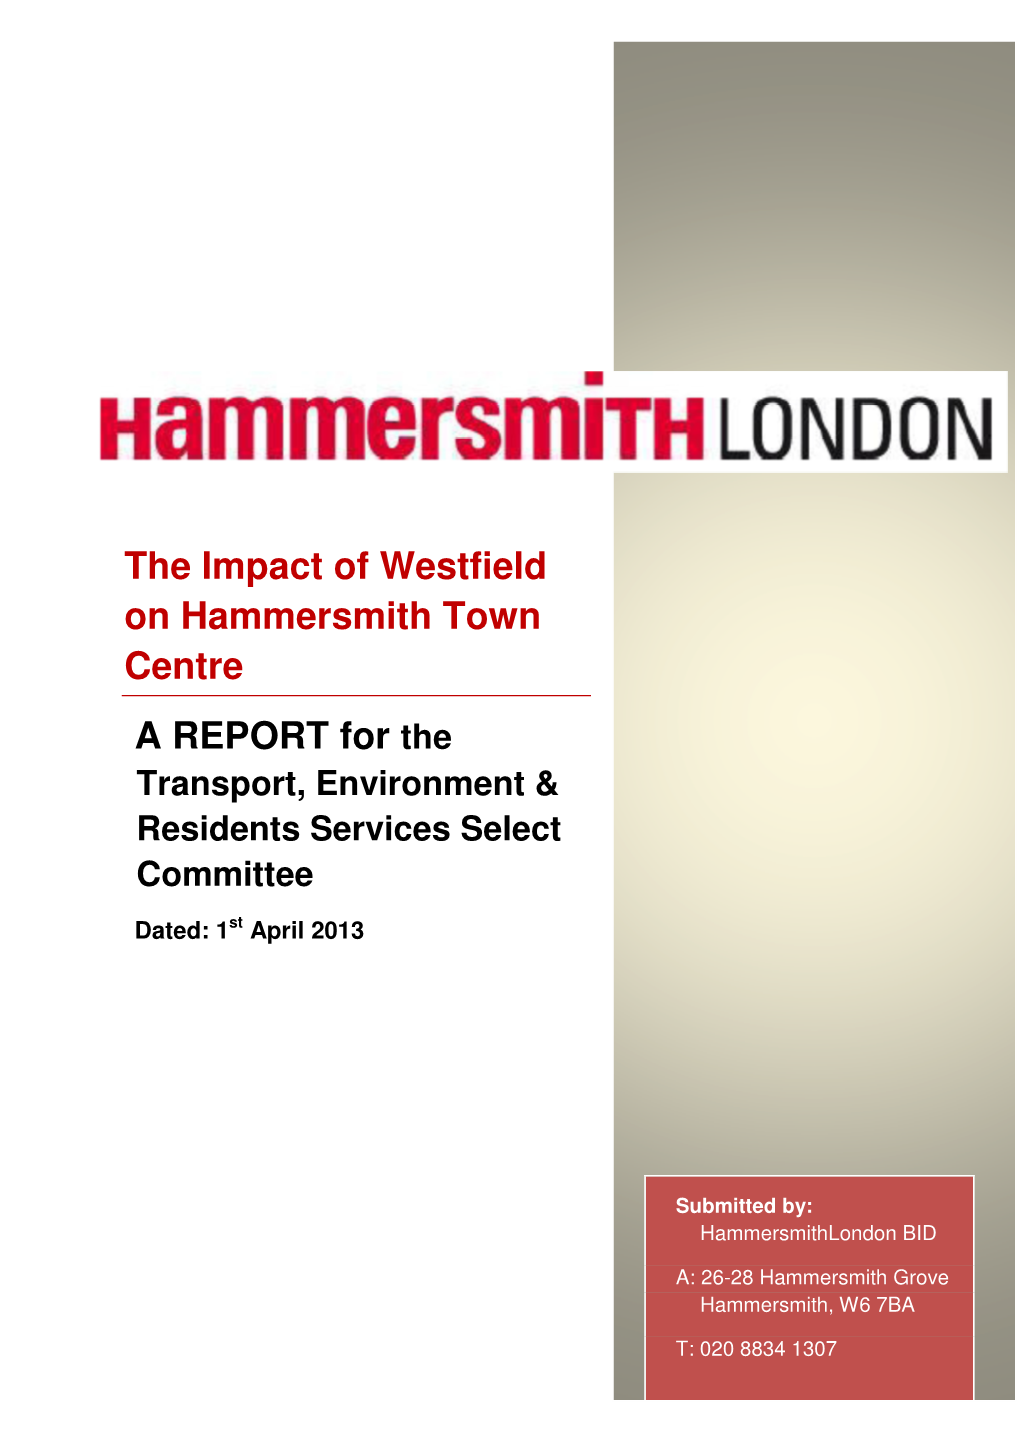 The Impact of Westfield on Hammersmith Town Centre a REPORT for the Transport, Environment & Residents Services Select Committee